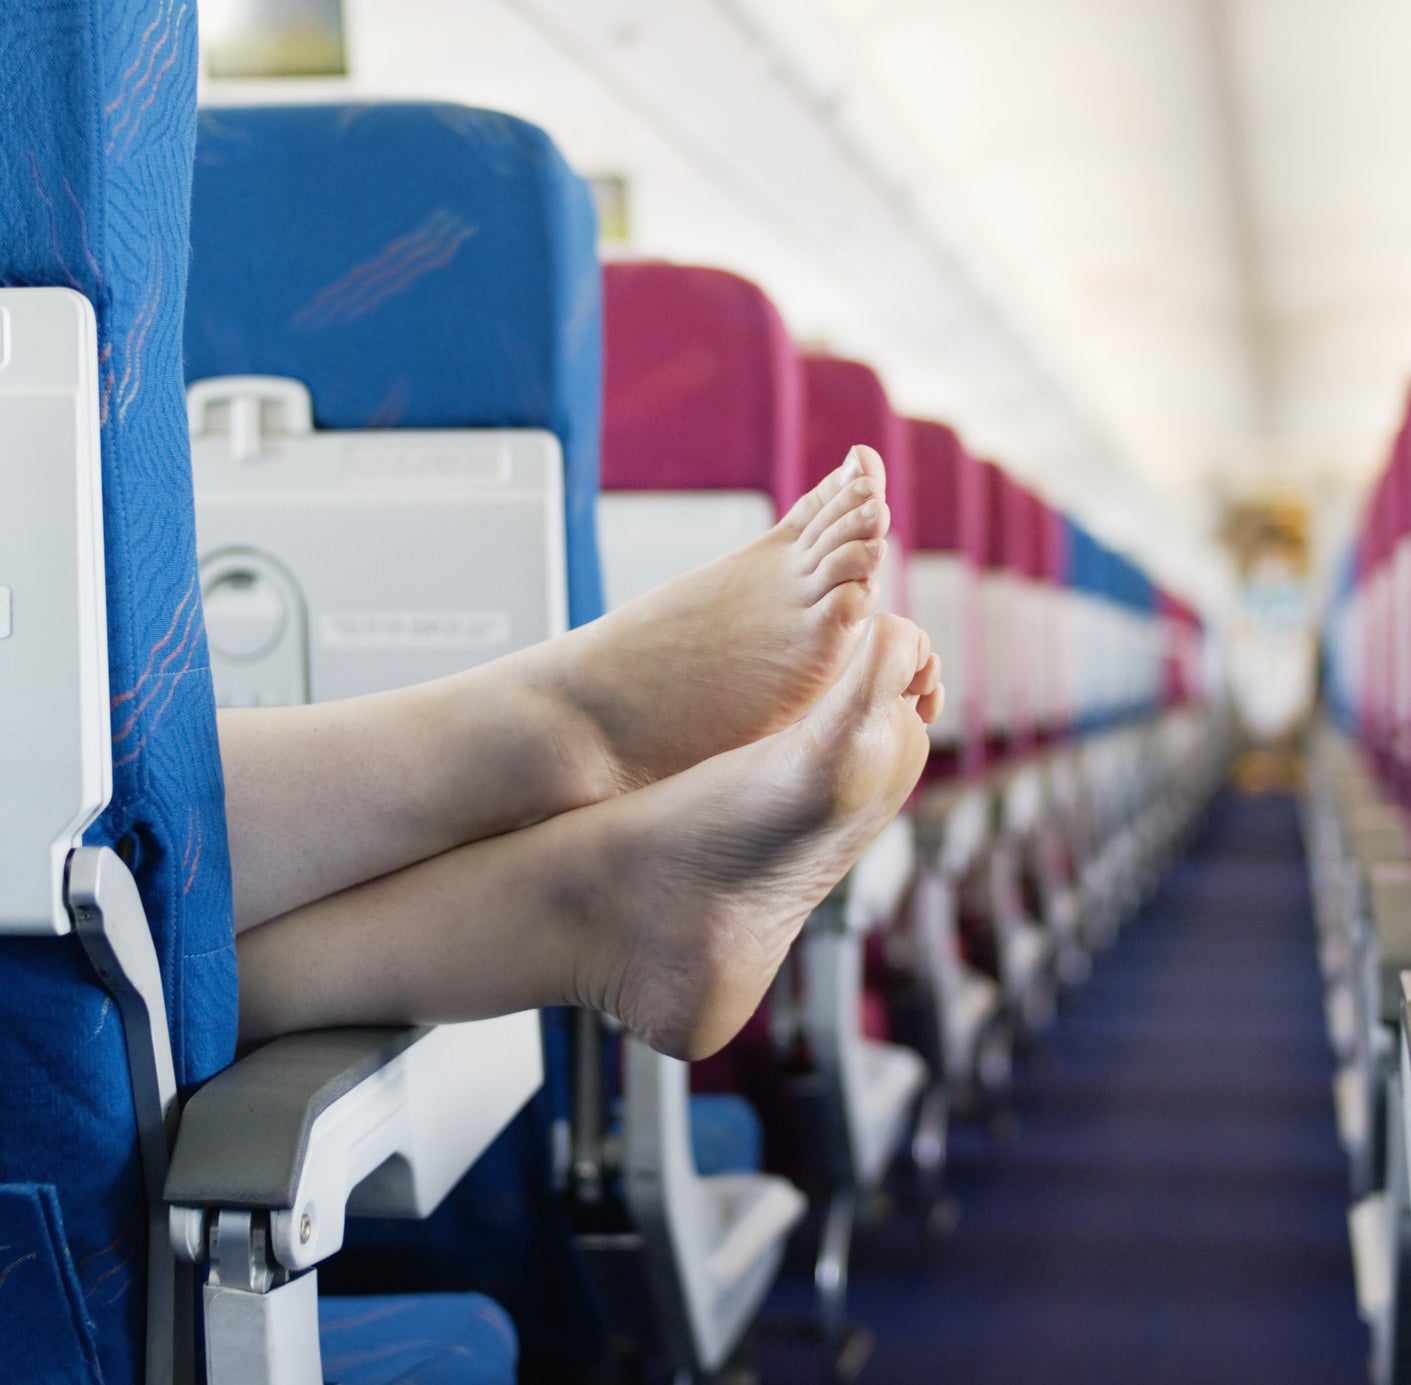 A passenger sticks their bare feet out into the aisle